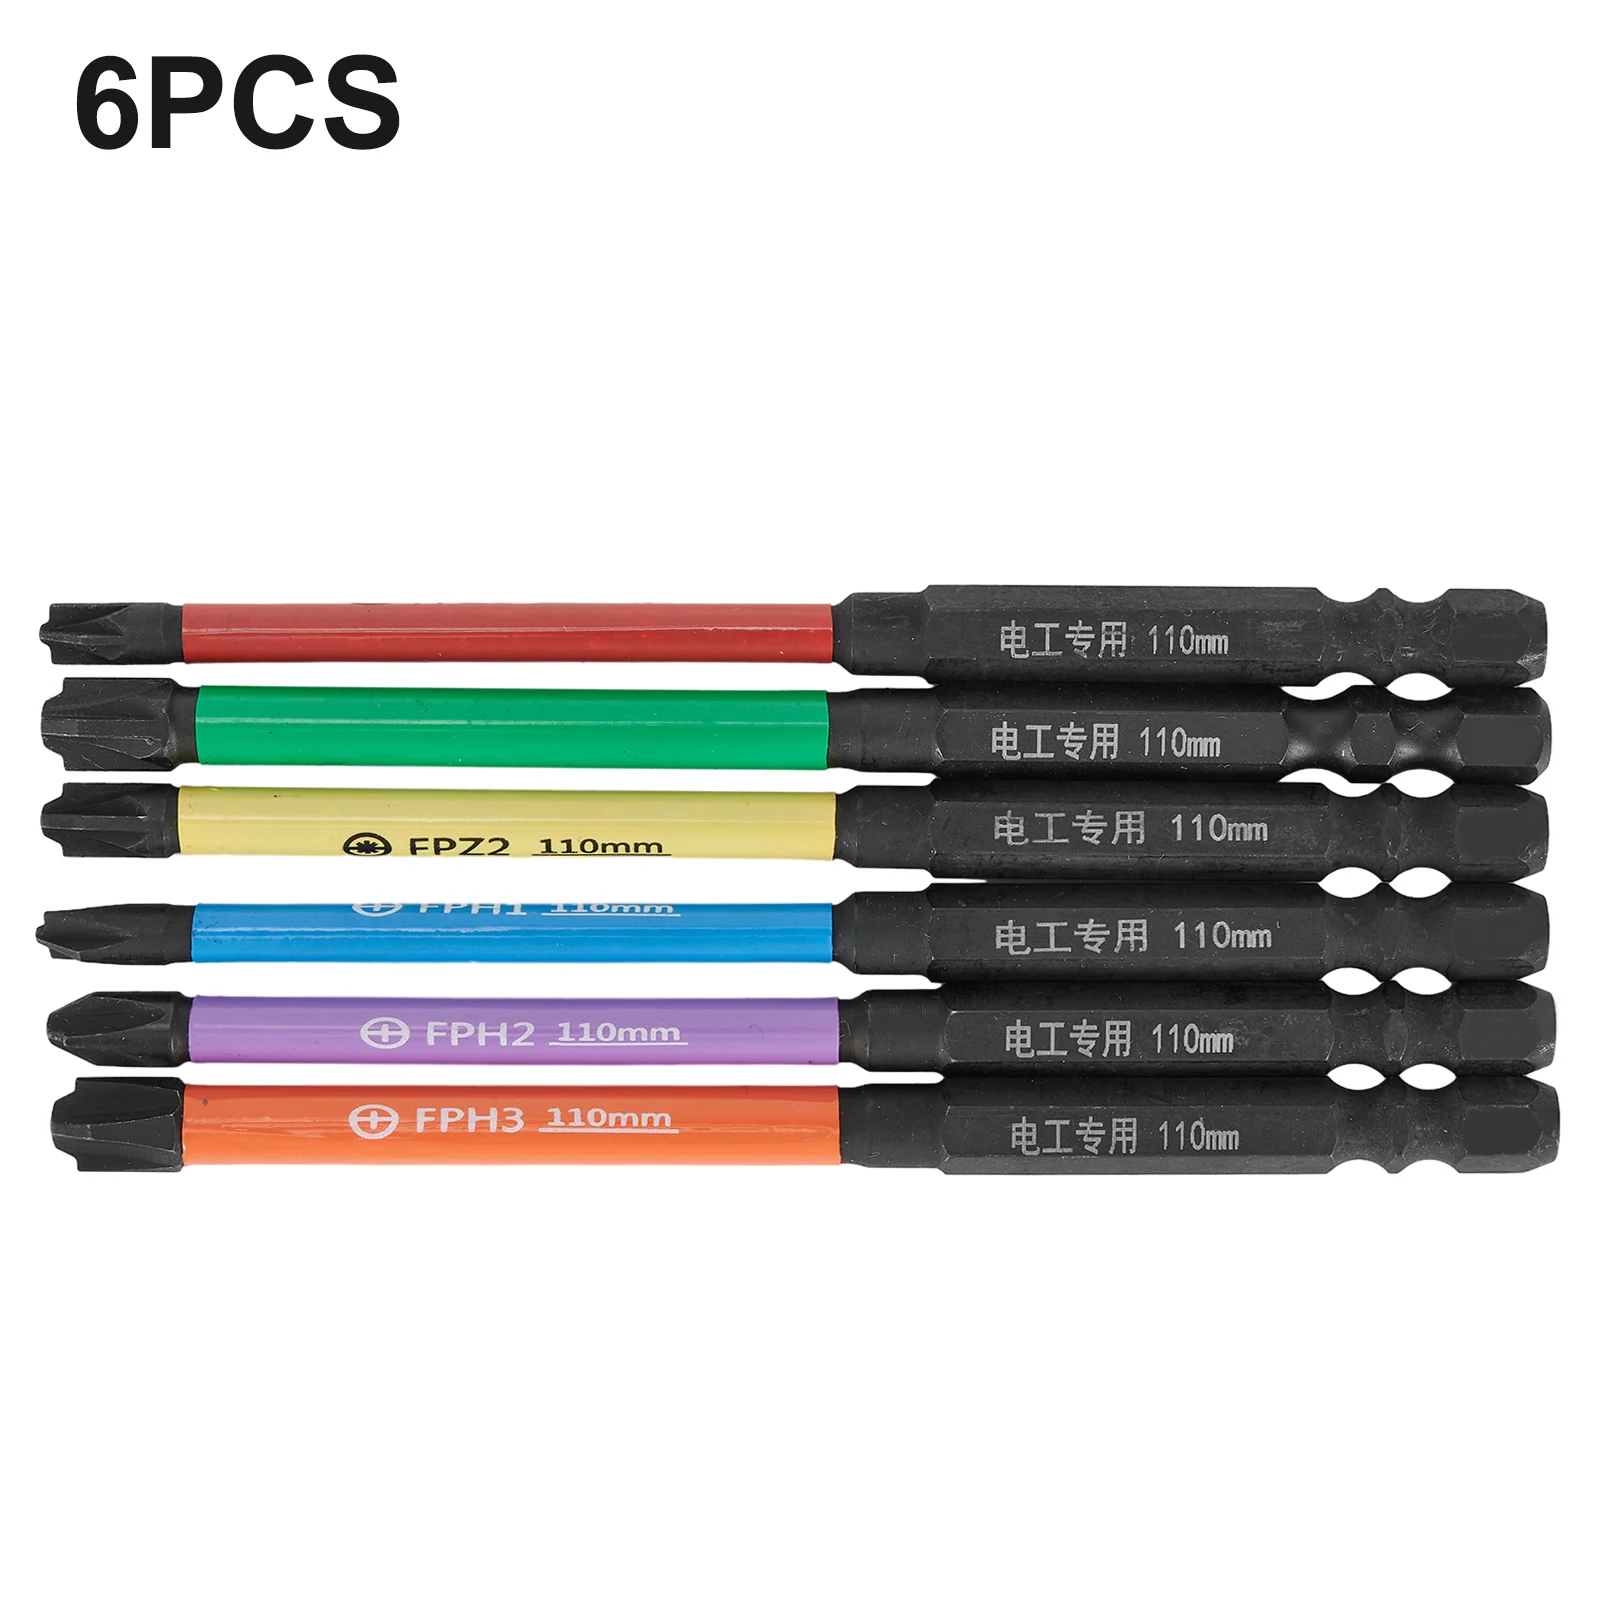 

Electrician Screwdriver Bits 110mm / 4.33’’ Length 6 Pcs/set Alloy Steel FPH1/FPH2/FPH3/FPZ1/FPZ2/FPZ3 Brand New High Quality